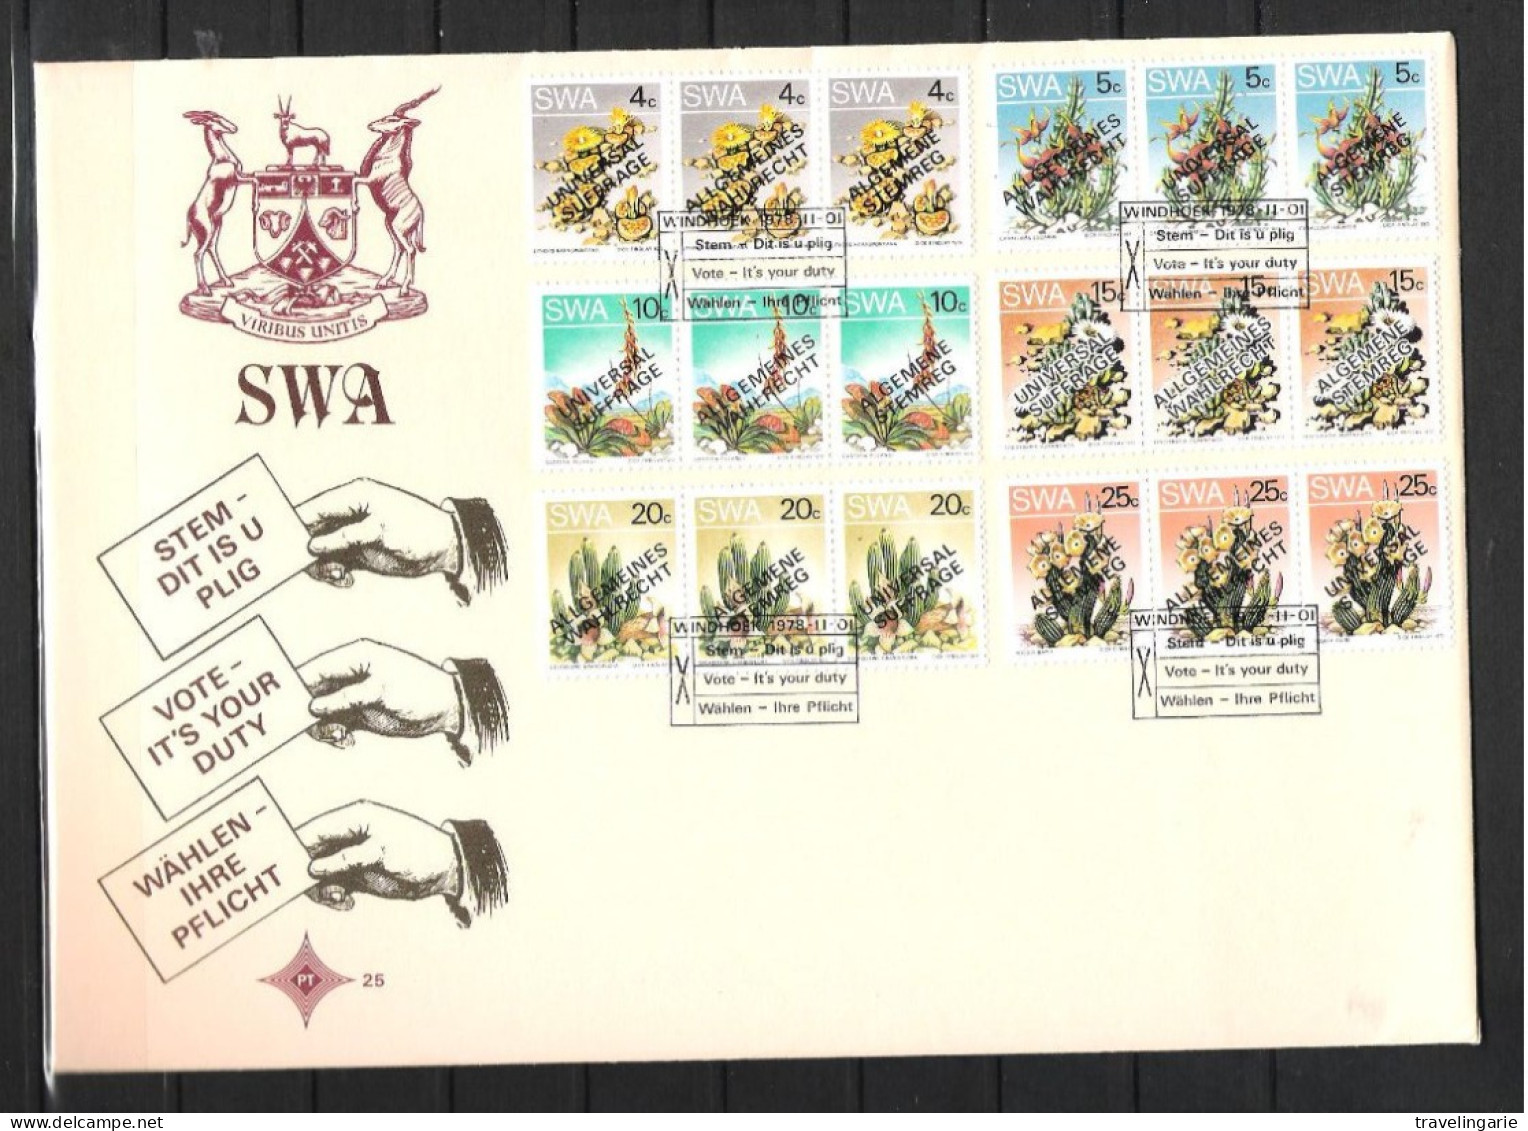 South West Africa 1978 Election Overprint Cactus Stamps FDC No. 25 - Cactus